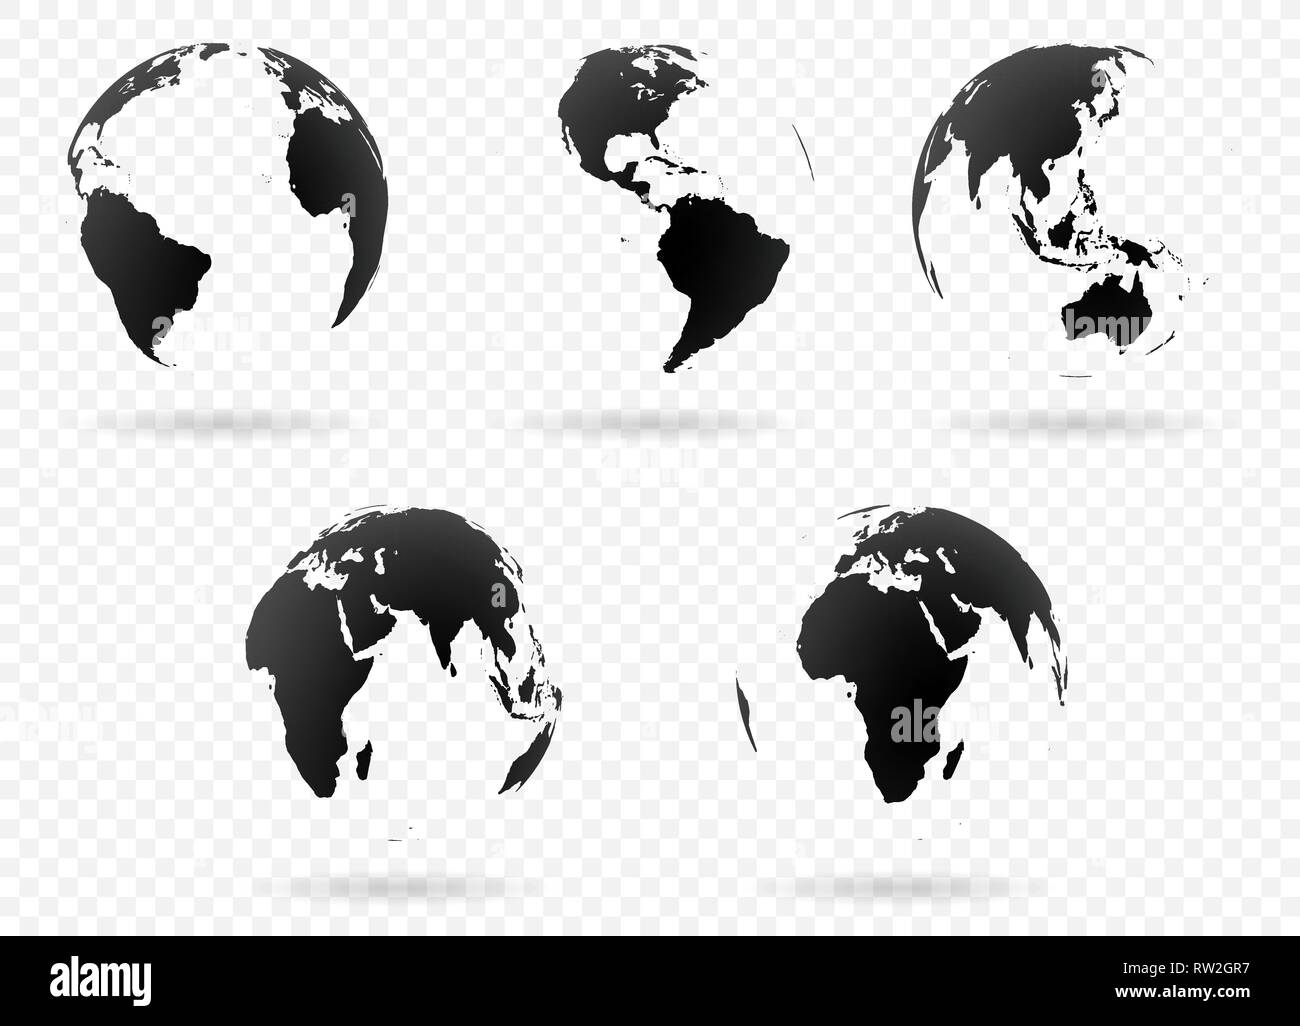 Set of Earth globe icon in different views. Highly detailed images of continents with transparent parts. Vector illustration Stock Vector